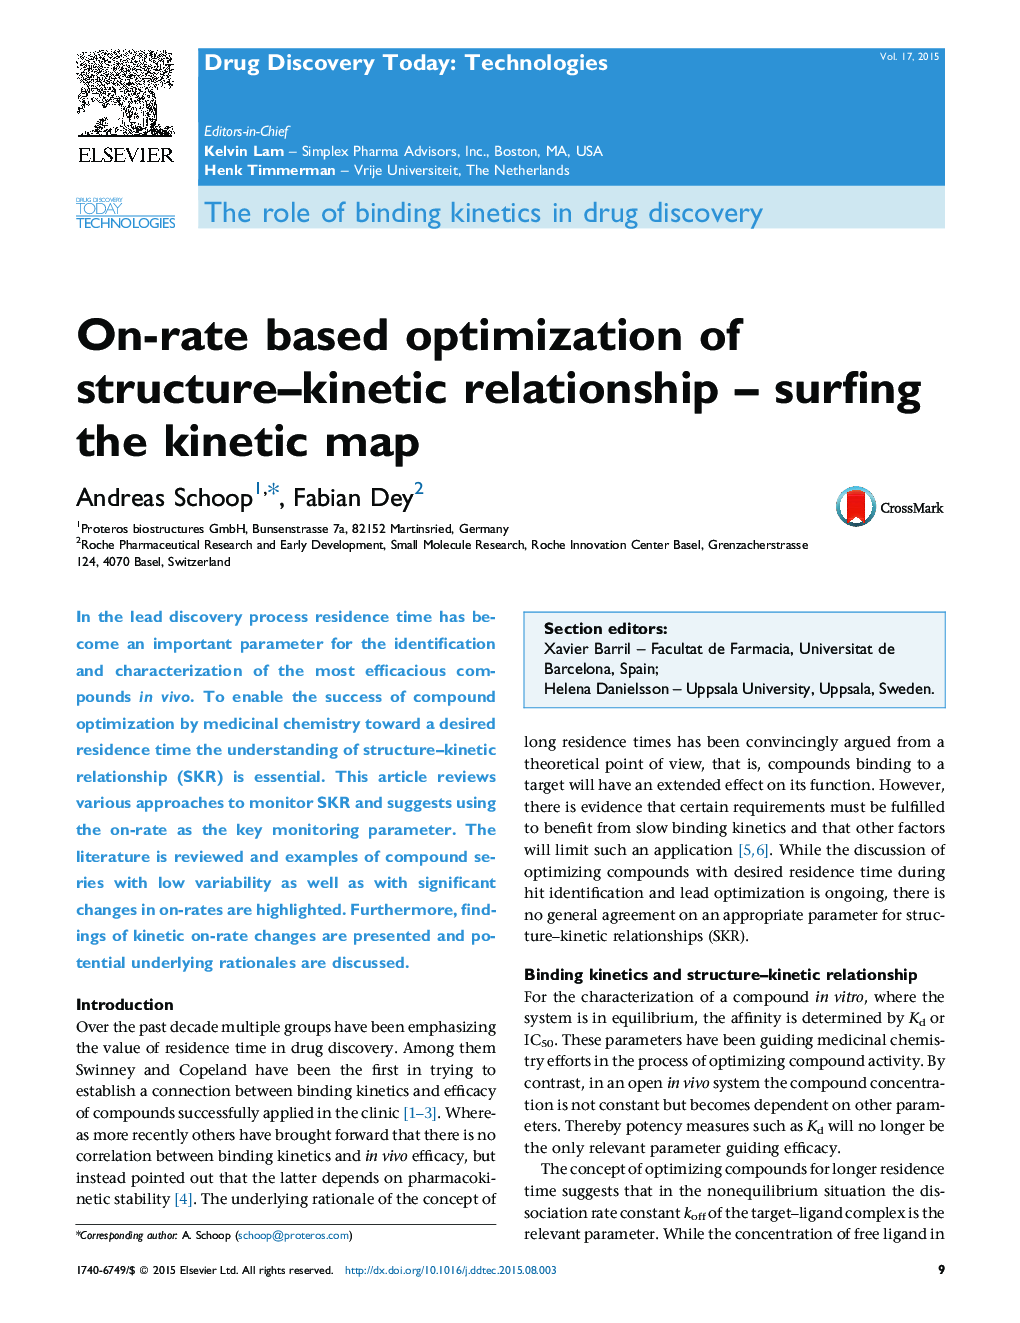 On-rate based optimization of structure–kinetic relationship – surfing the kinetic map